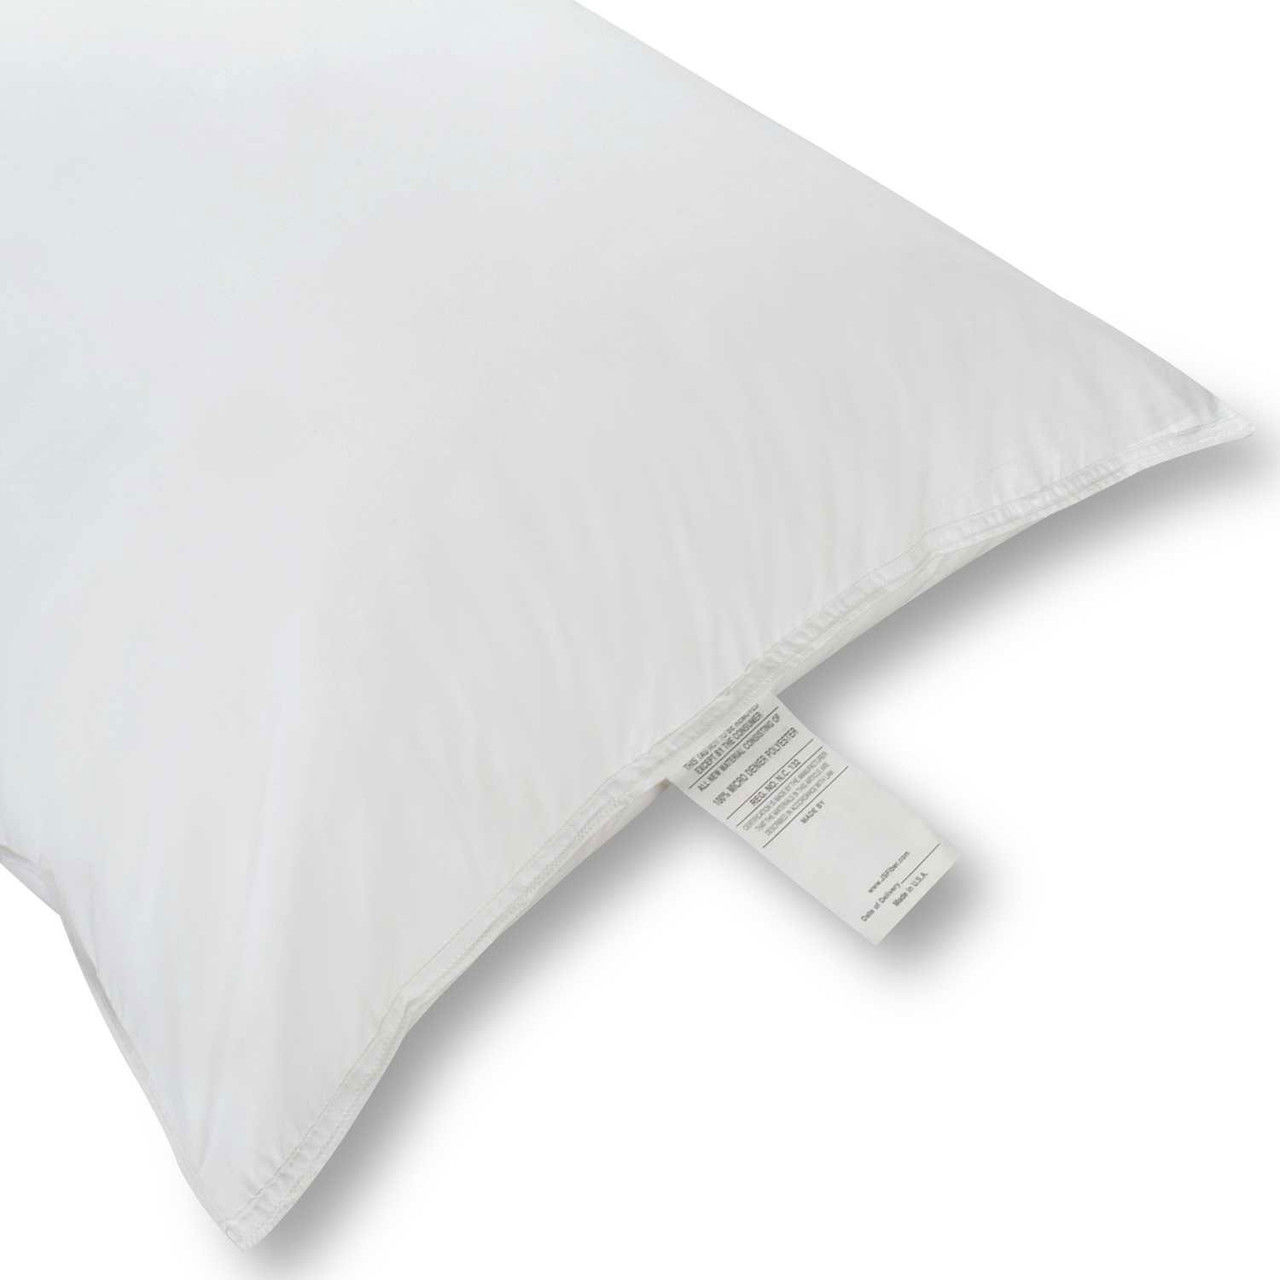 In which location is the ultra down pillow, with synthetic ultra down, manufactured?